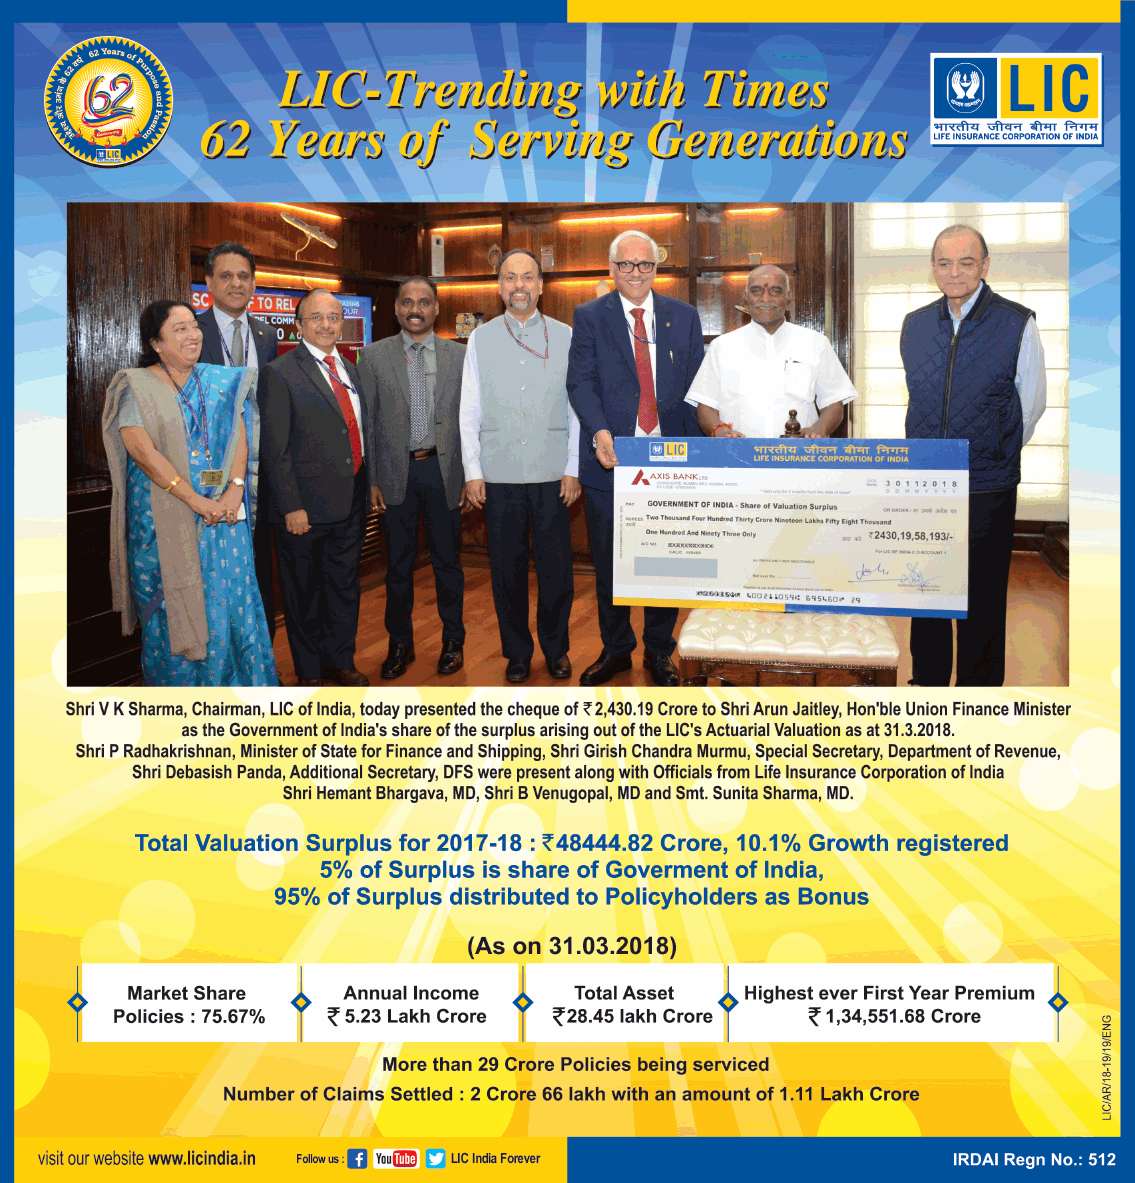 lic-trending-with-times-62-years-of-serving-generations-ad-times-of-india-delhi-01-12-2018.png